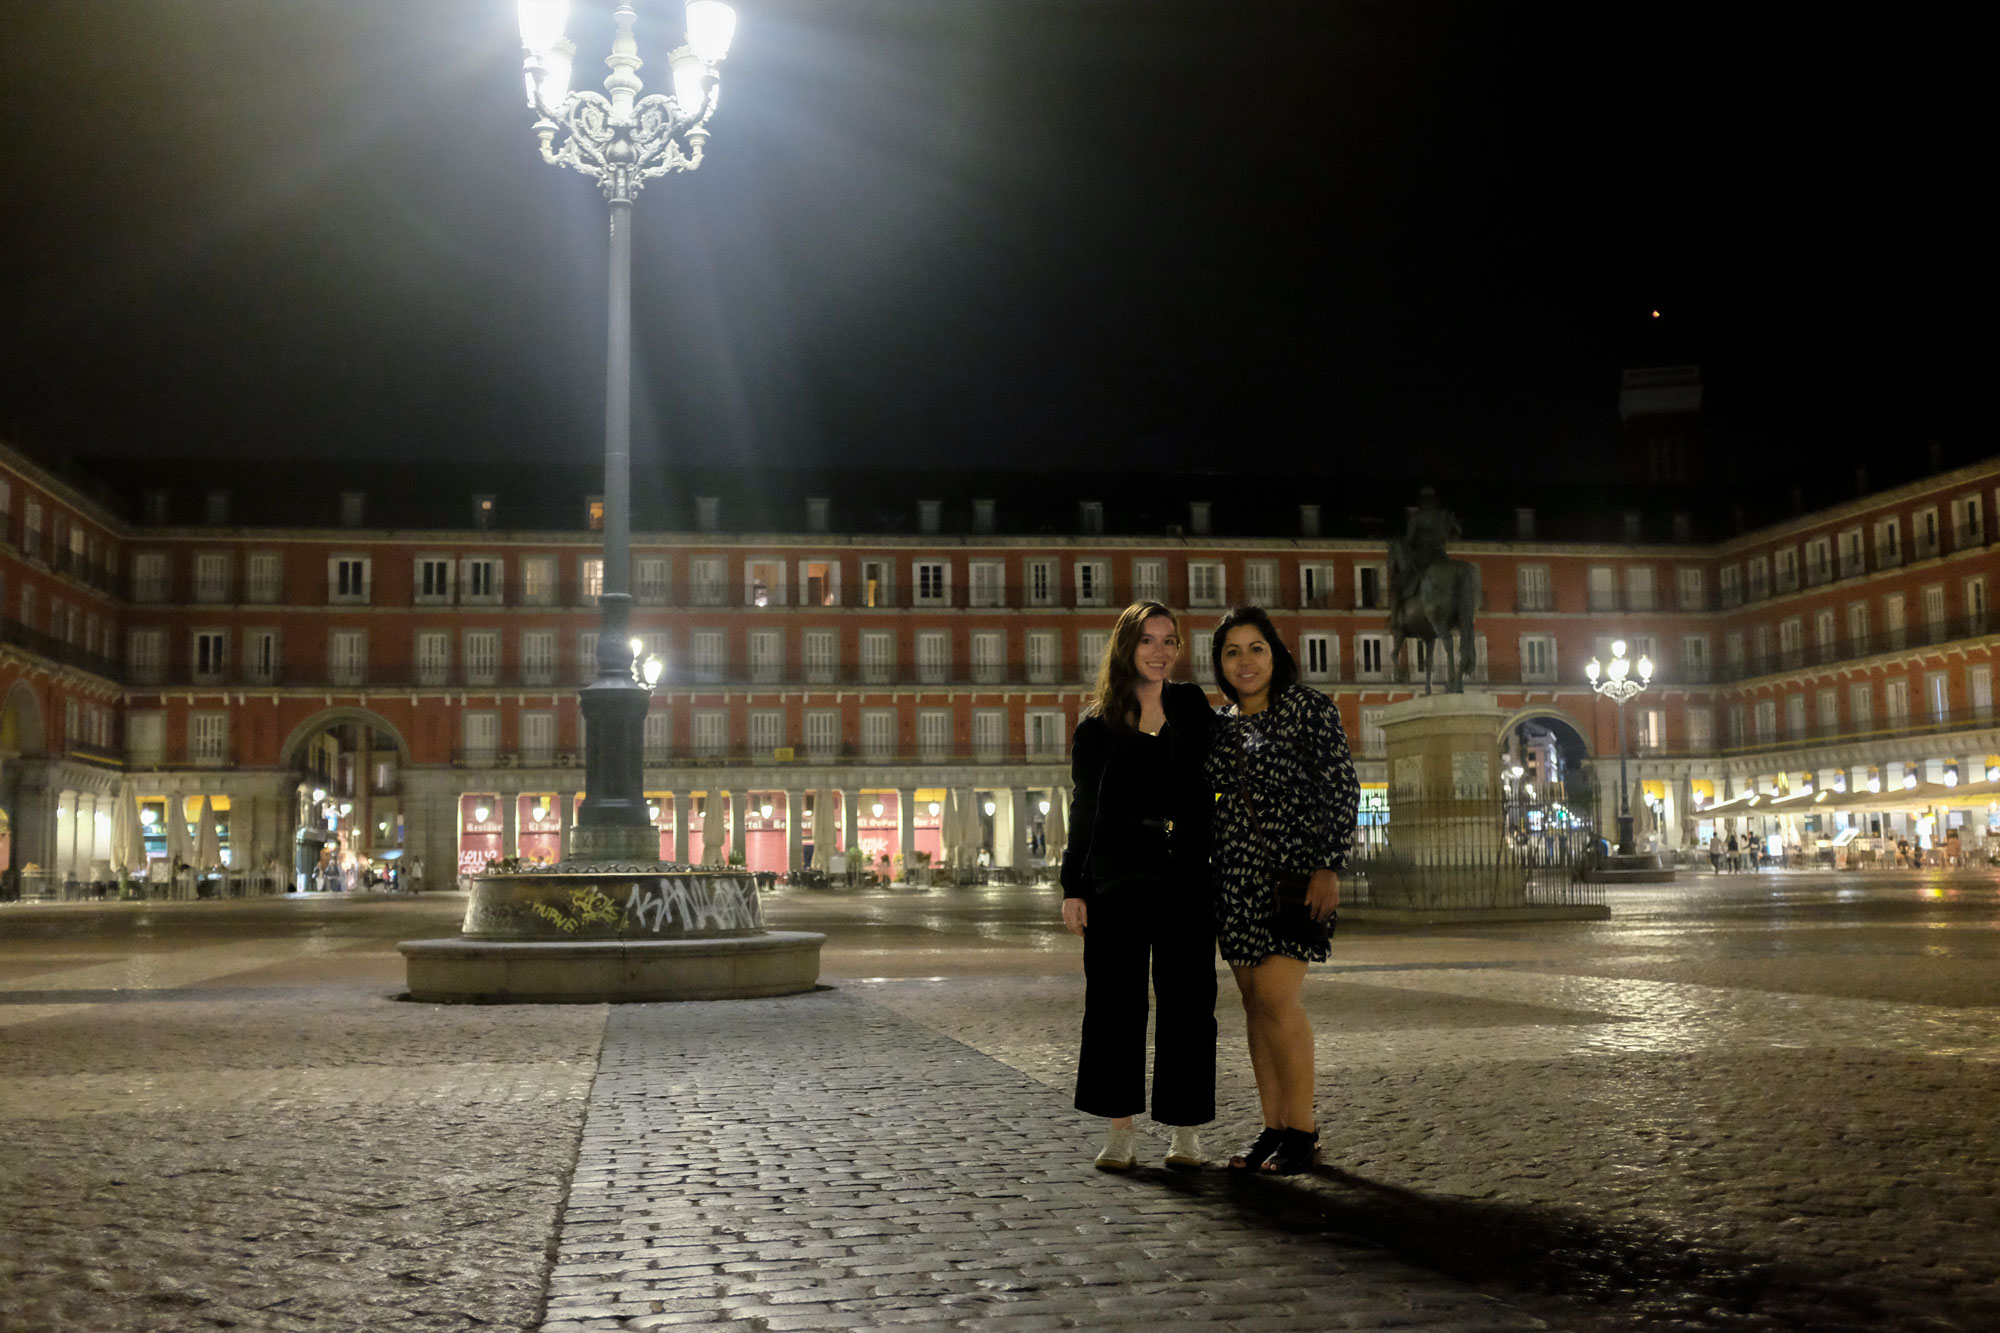 Alyssa and Michael's sister in the plaza mayor after dark